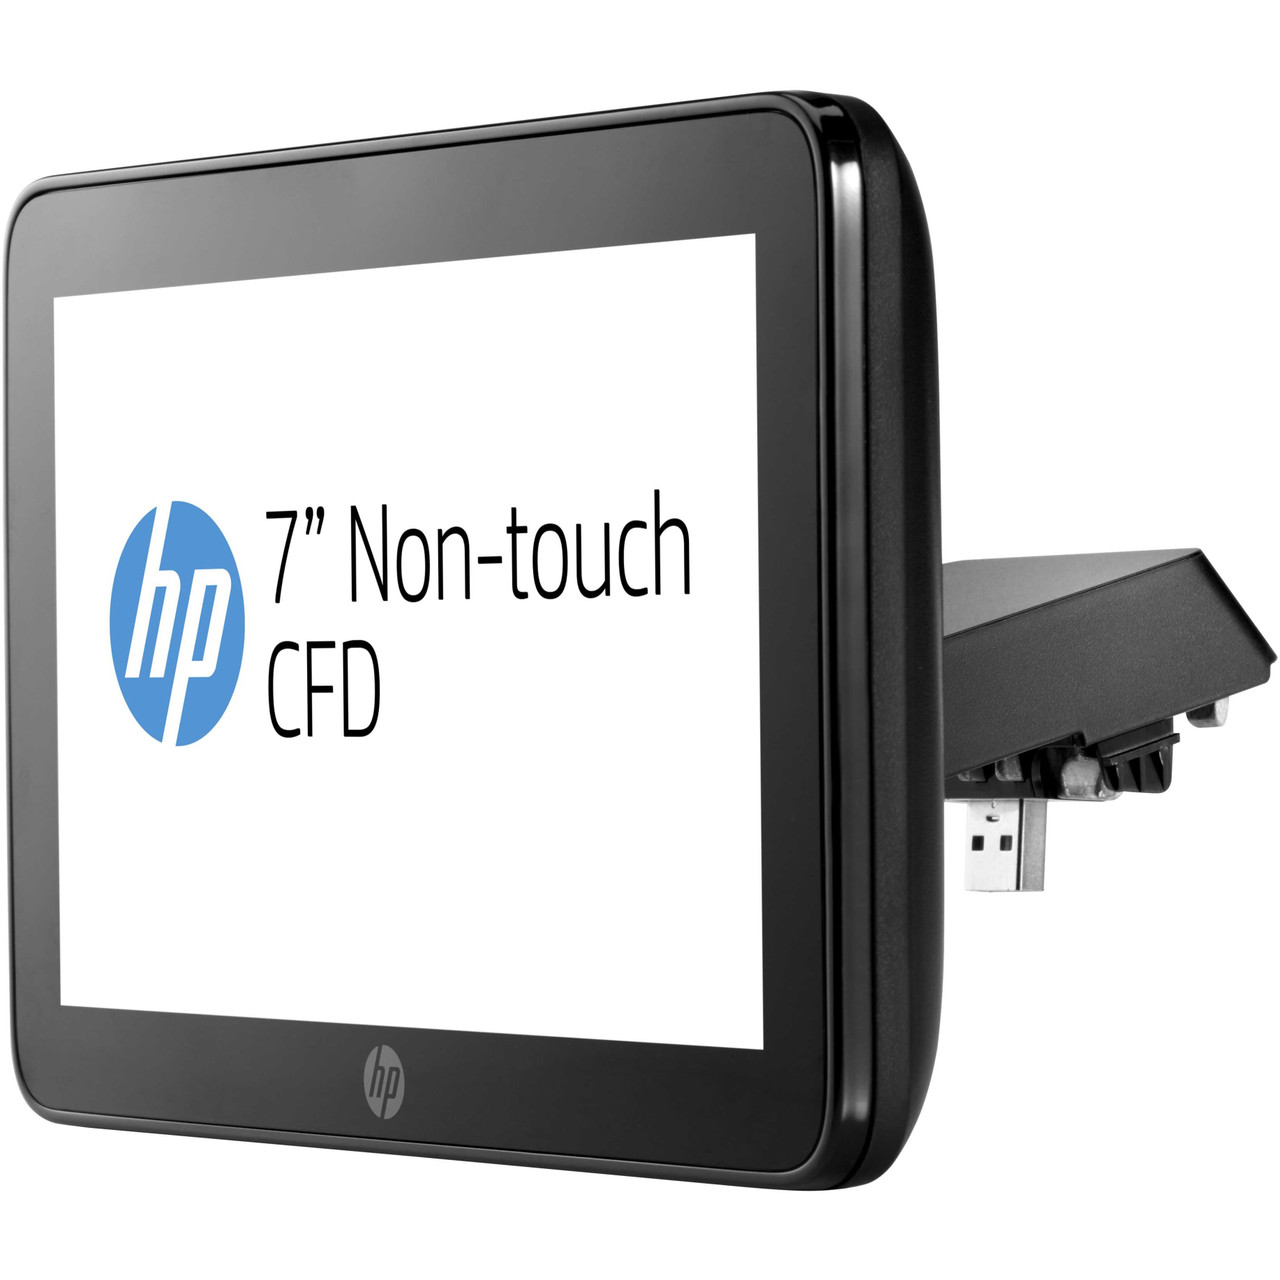 HP RP9 Integrated 7a Non-Touch Customer-Facing Display w/Arm (P5A56AA) - P5A56AA